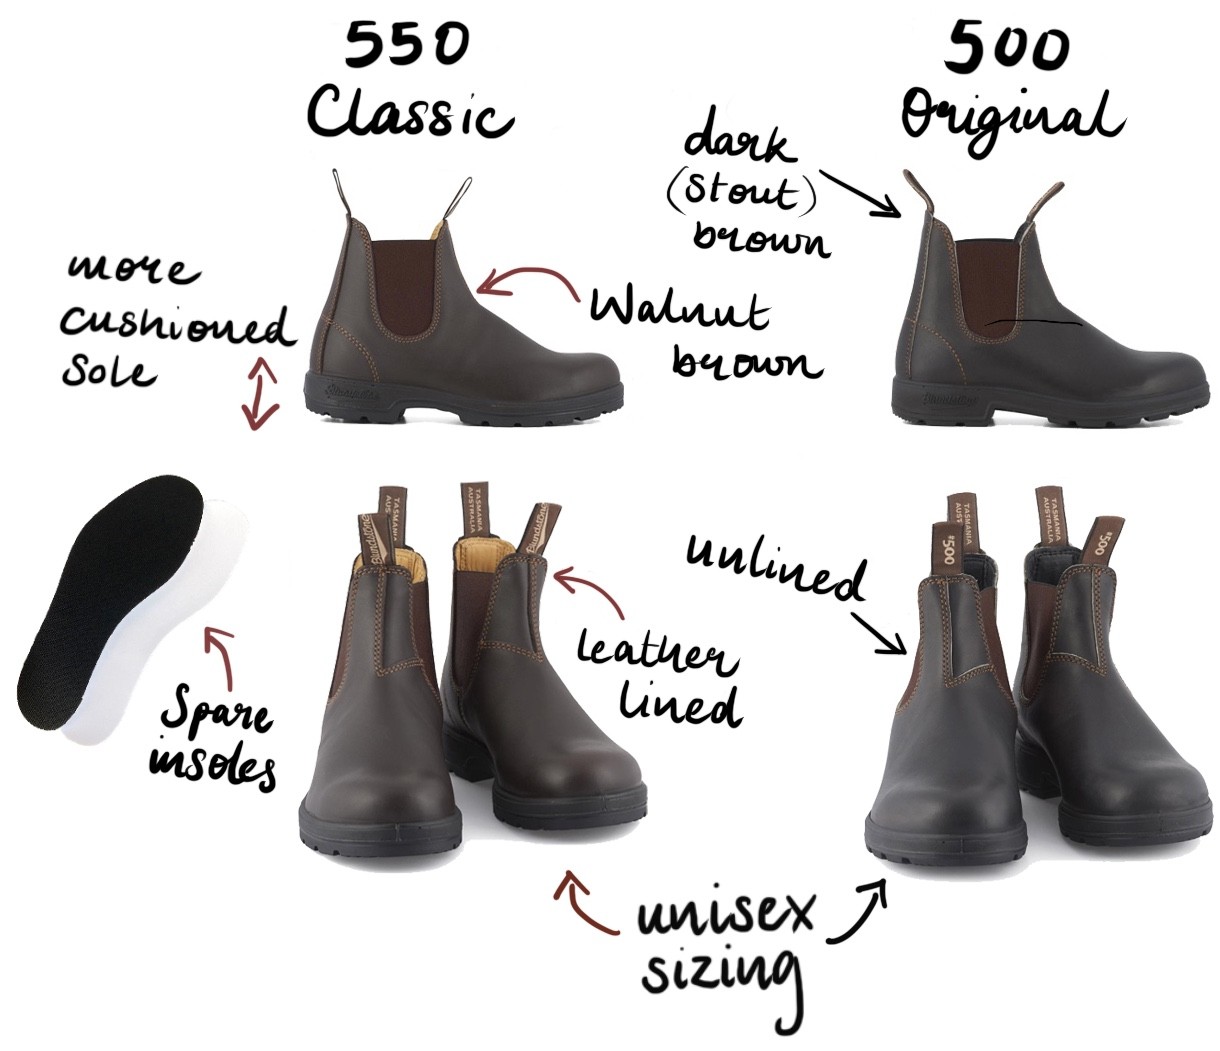 Are All Blundstones Unisex?